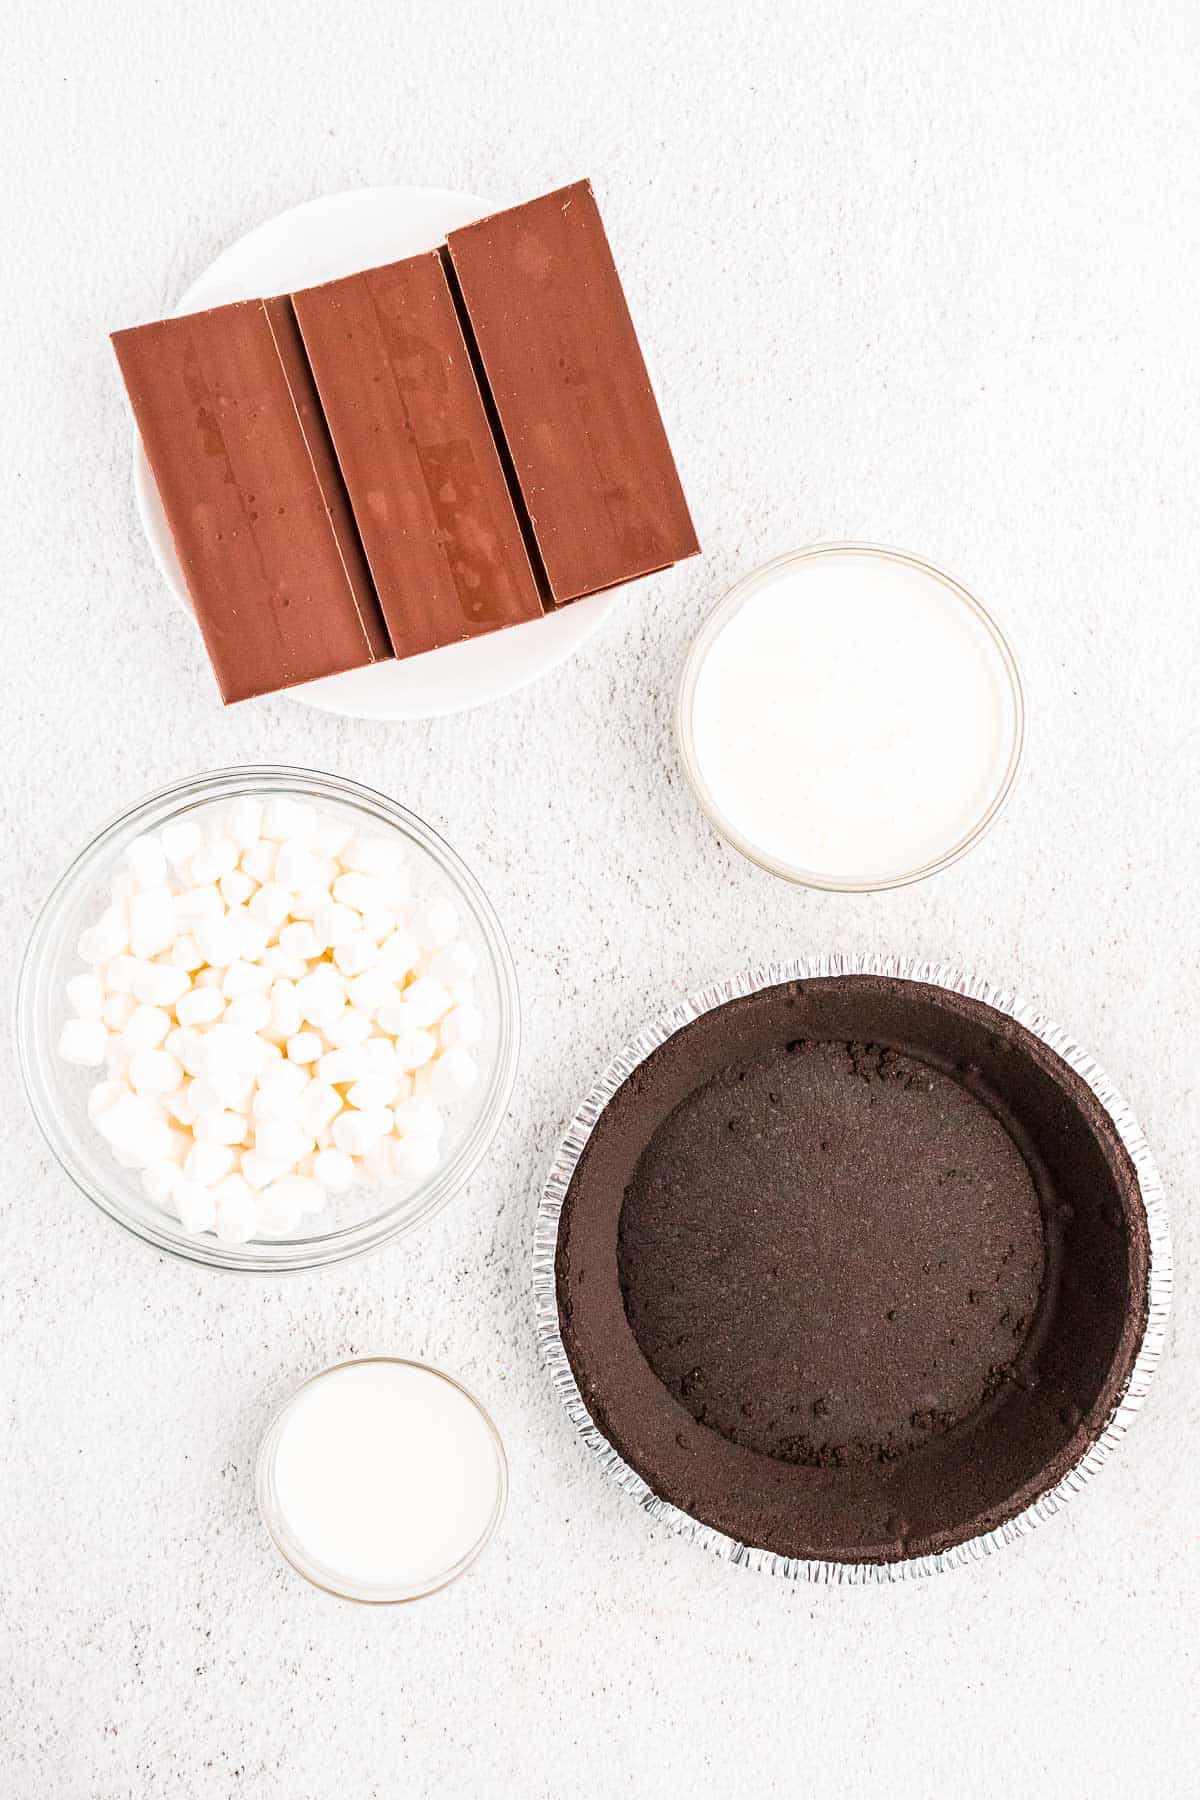 Ingredients to make no bake chocolate pie on a table.